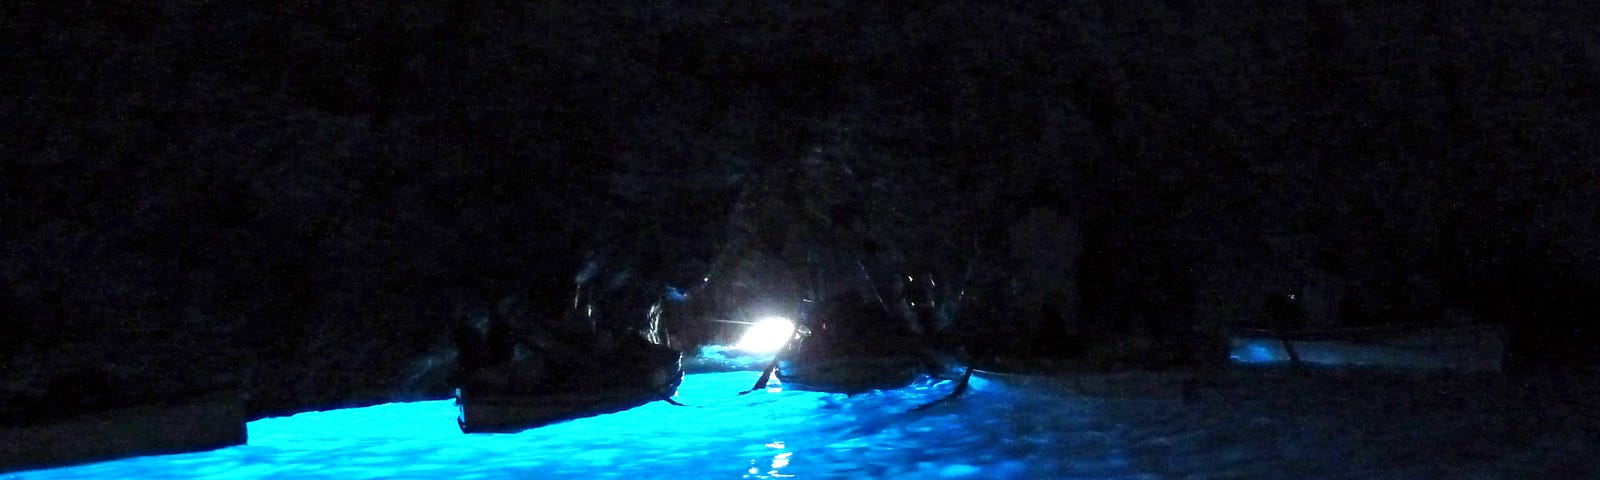 A dark cave with a small point of light in the center behind two rowboats. The water is glowing cerulean blue